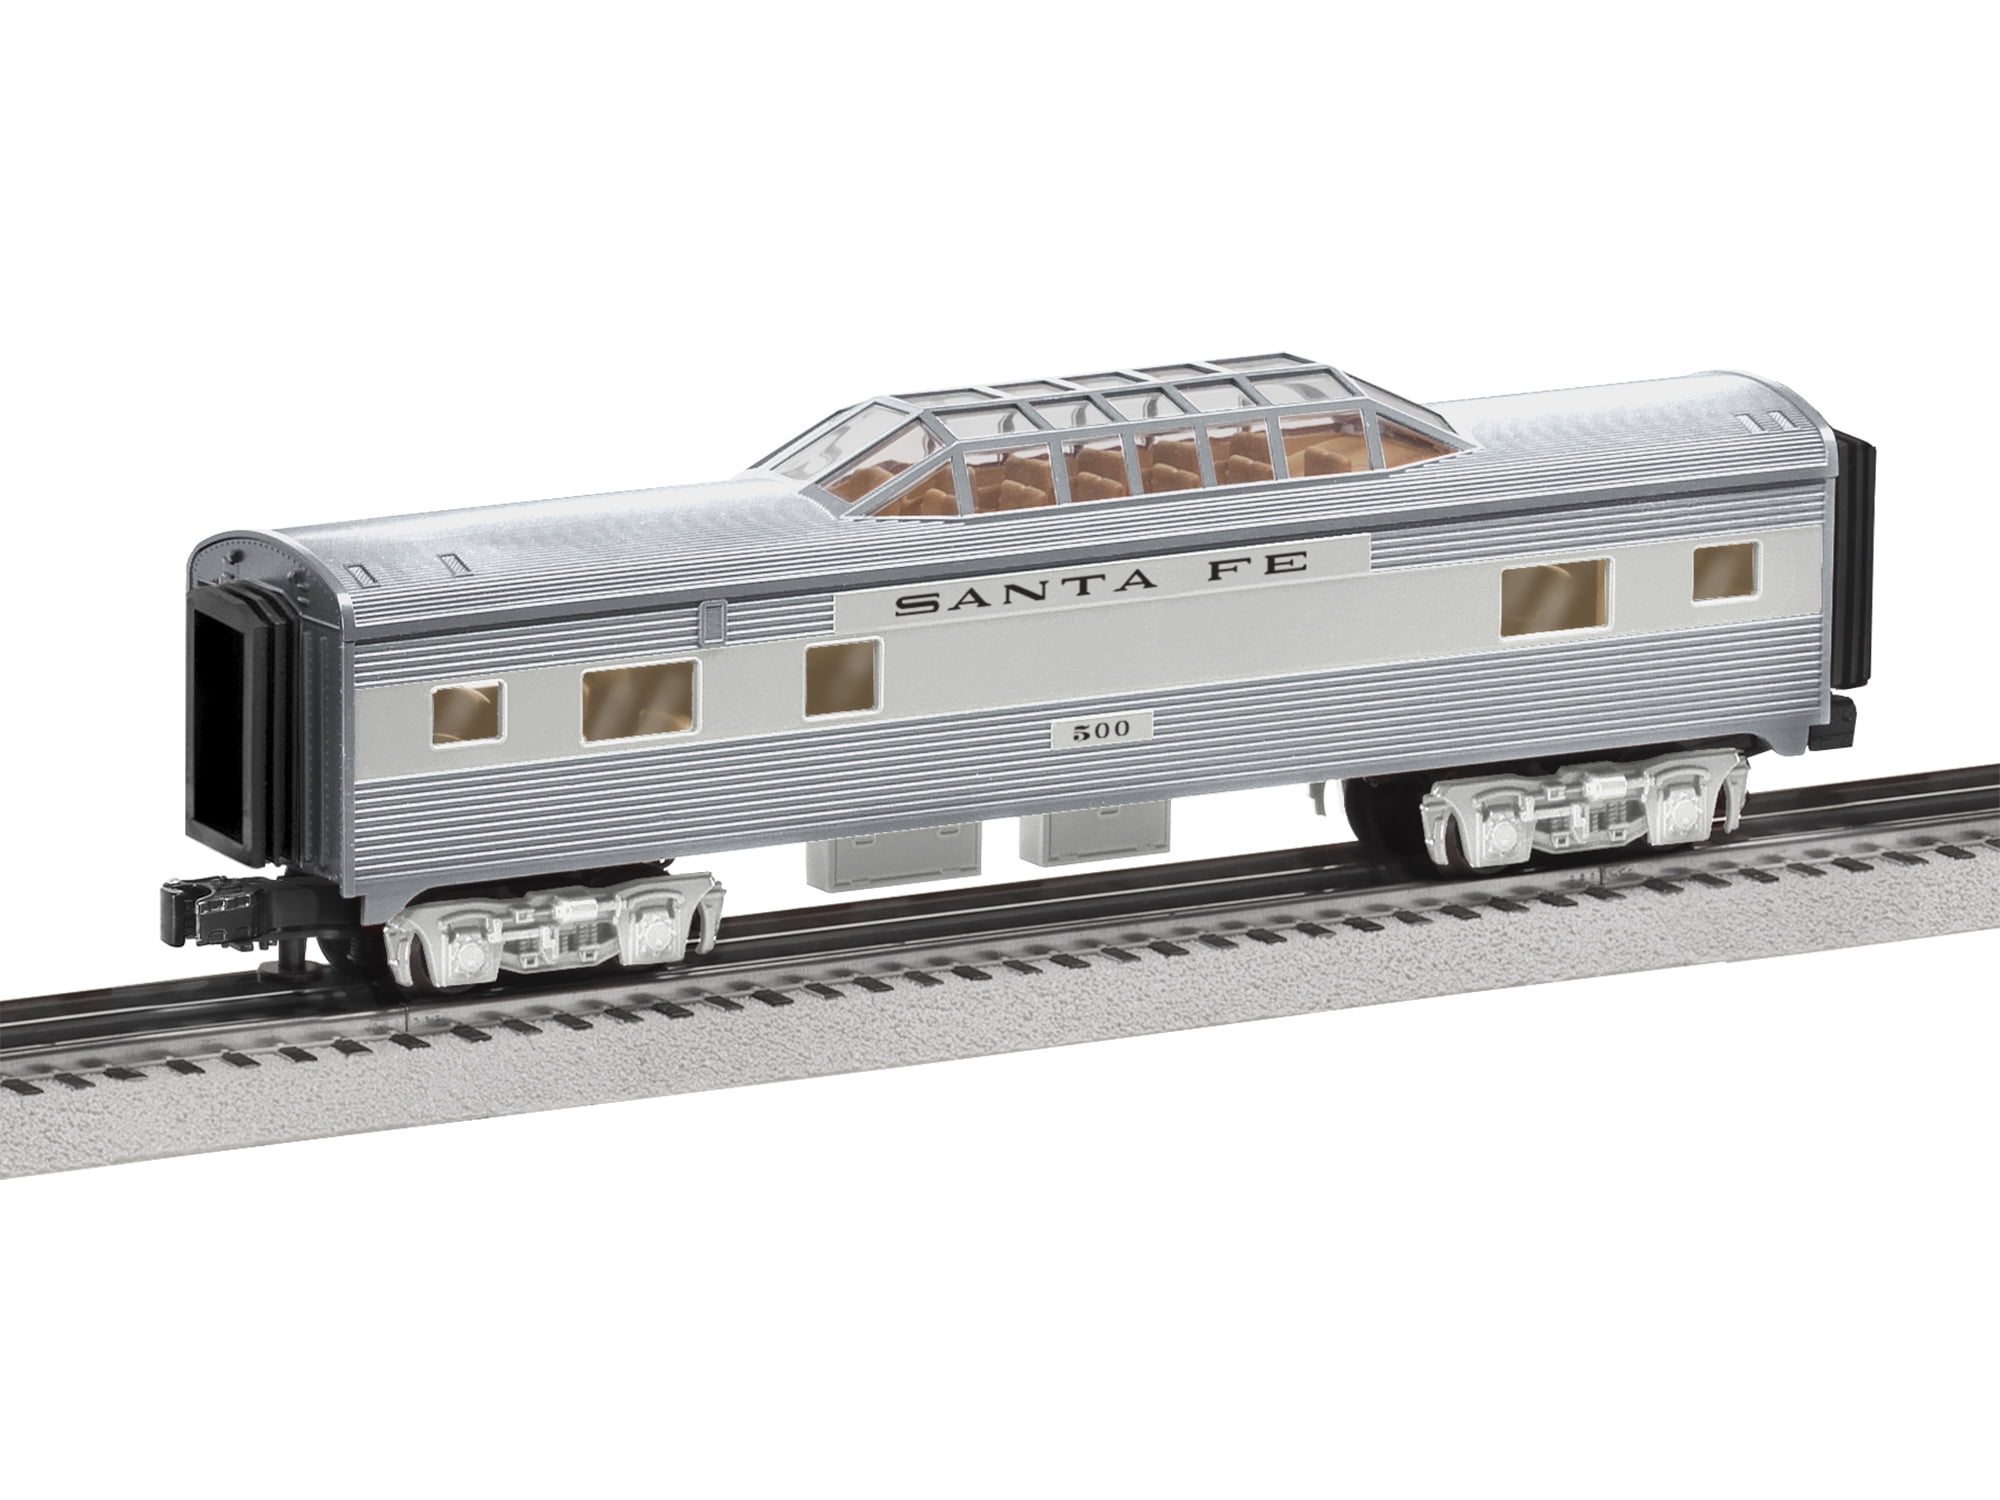 Electric train and passenger carriage Scale model railway